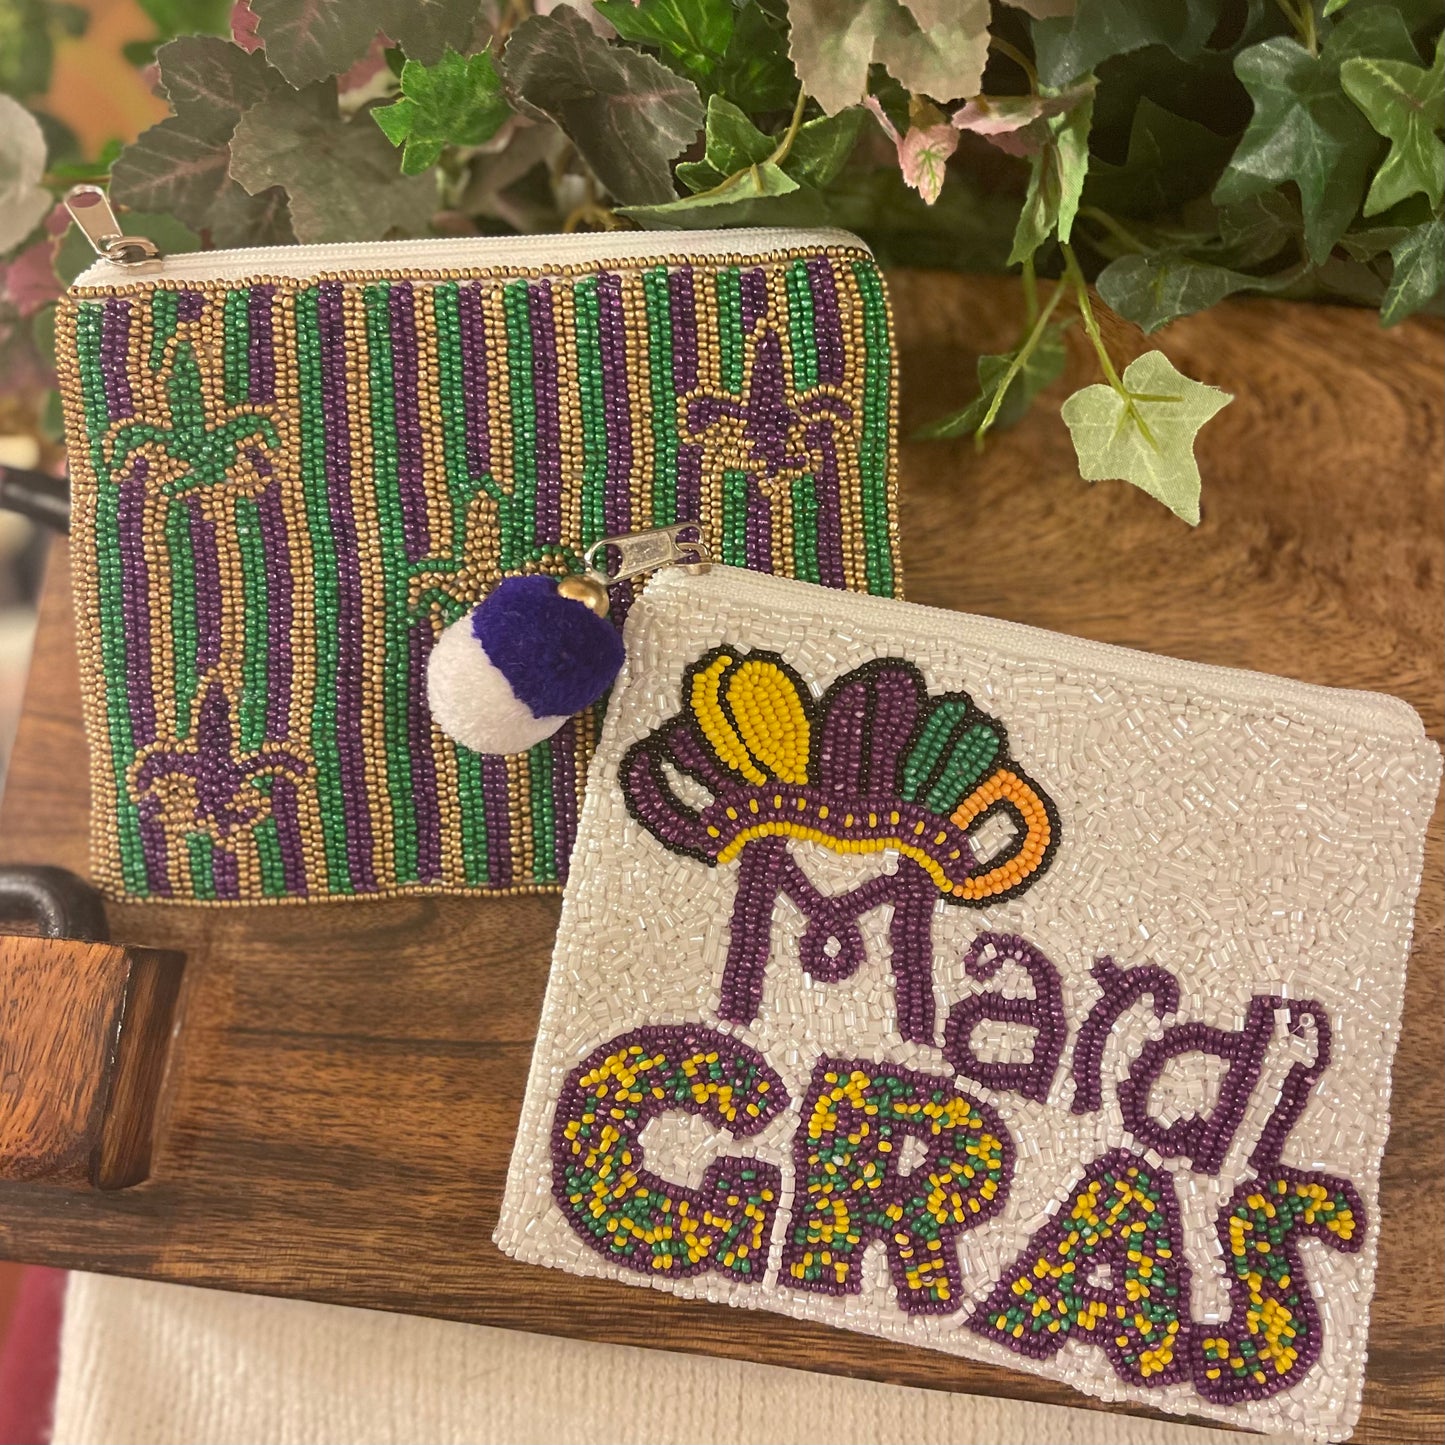 Mardi Gras Seed Bead Zippered Pouch